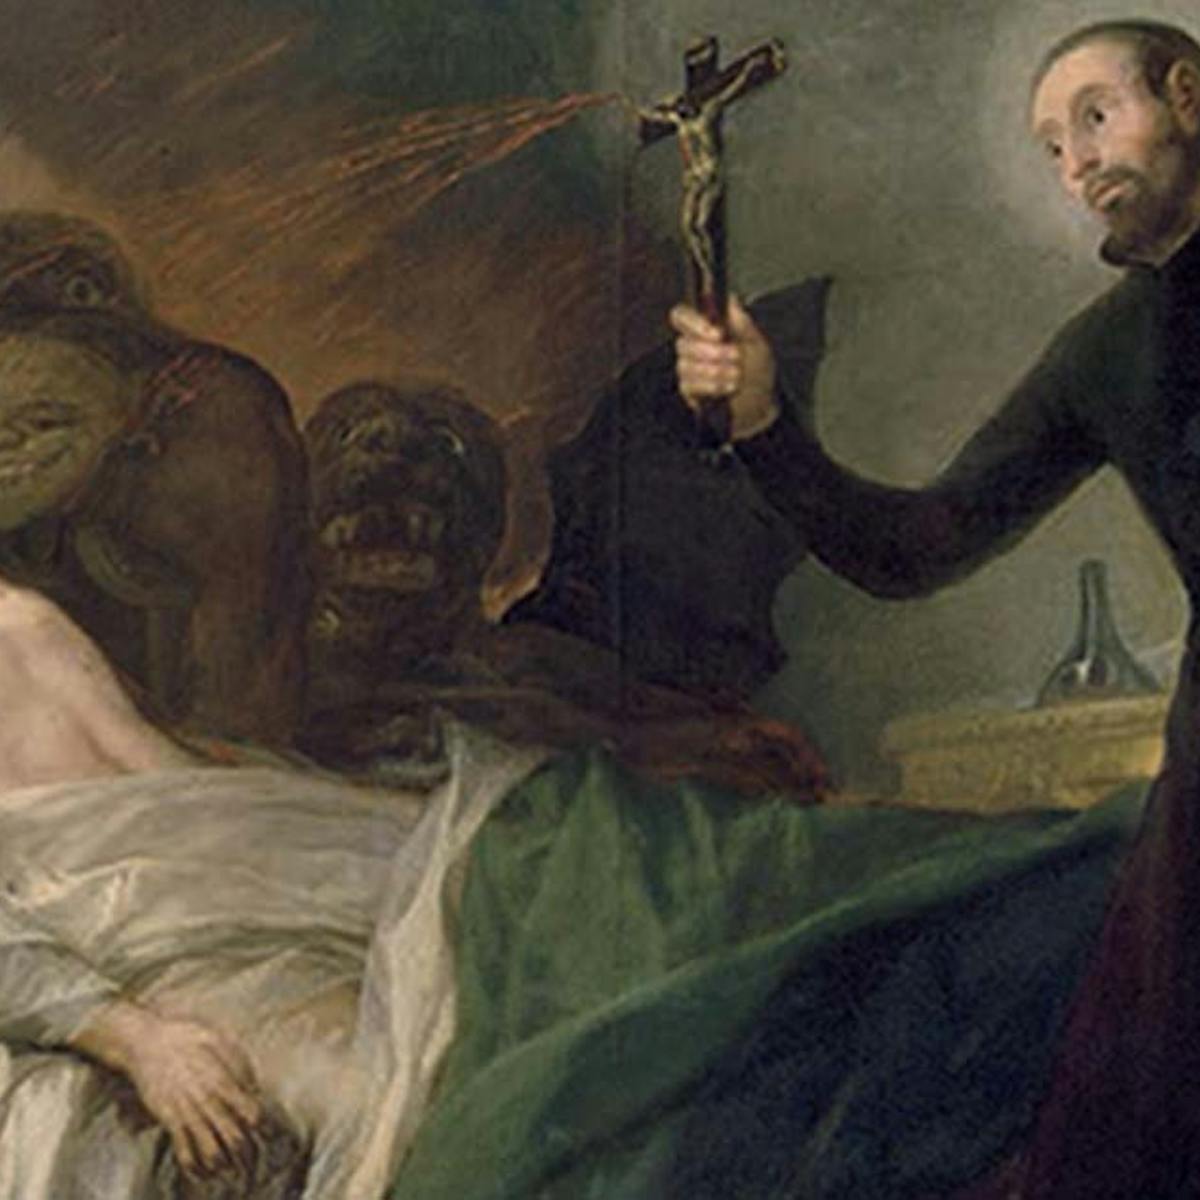 Exorcisms have been part of Christianity for centuries